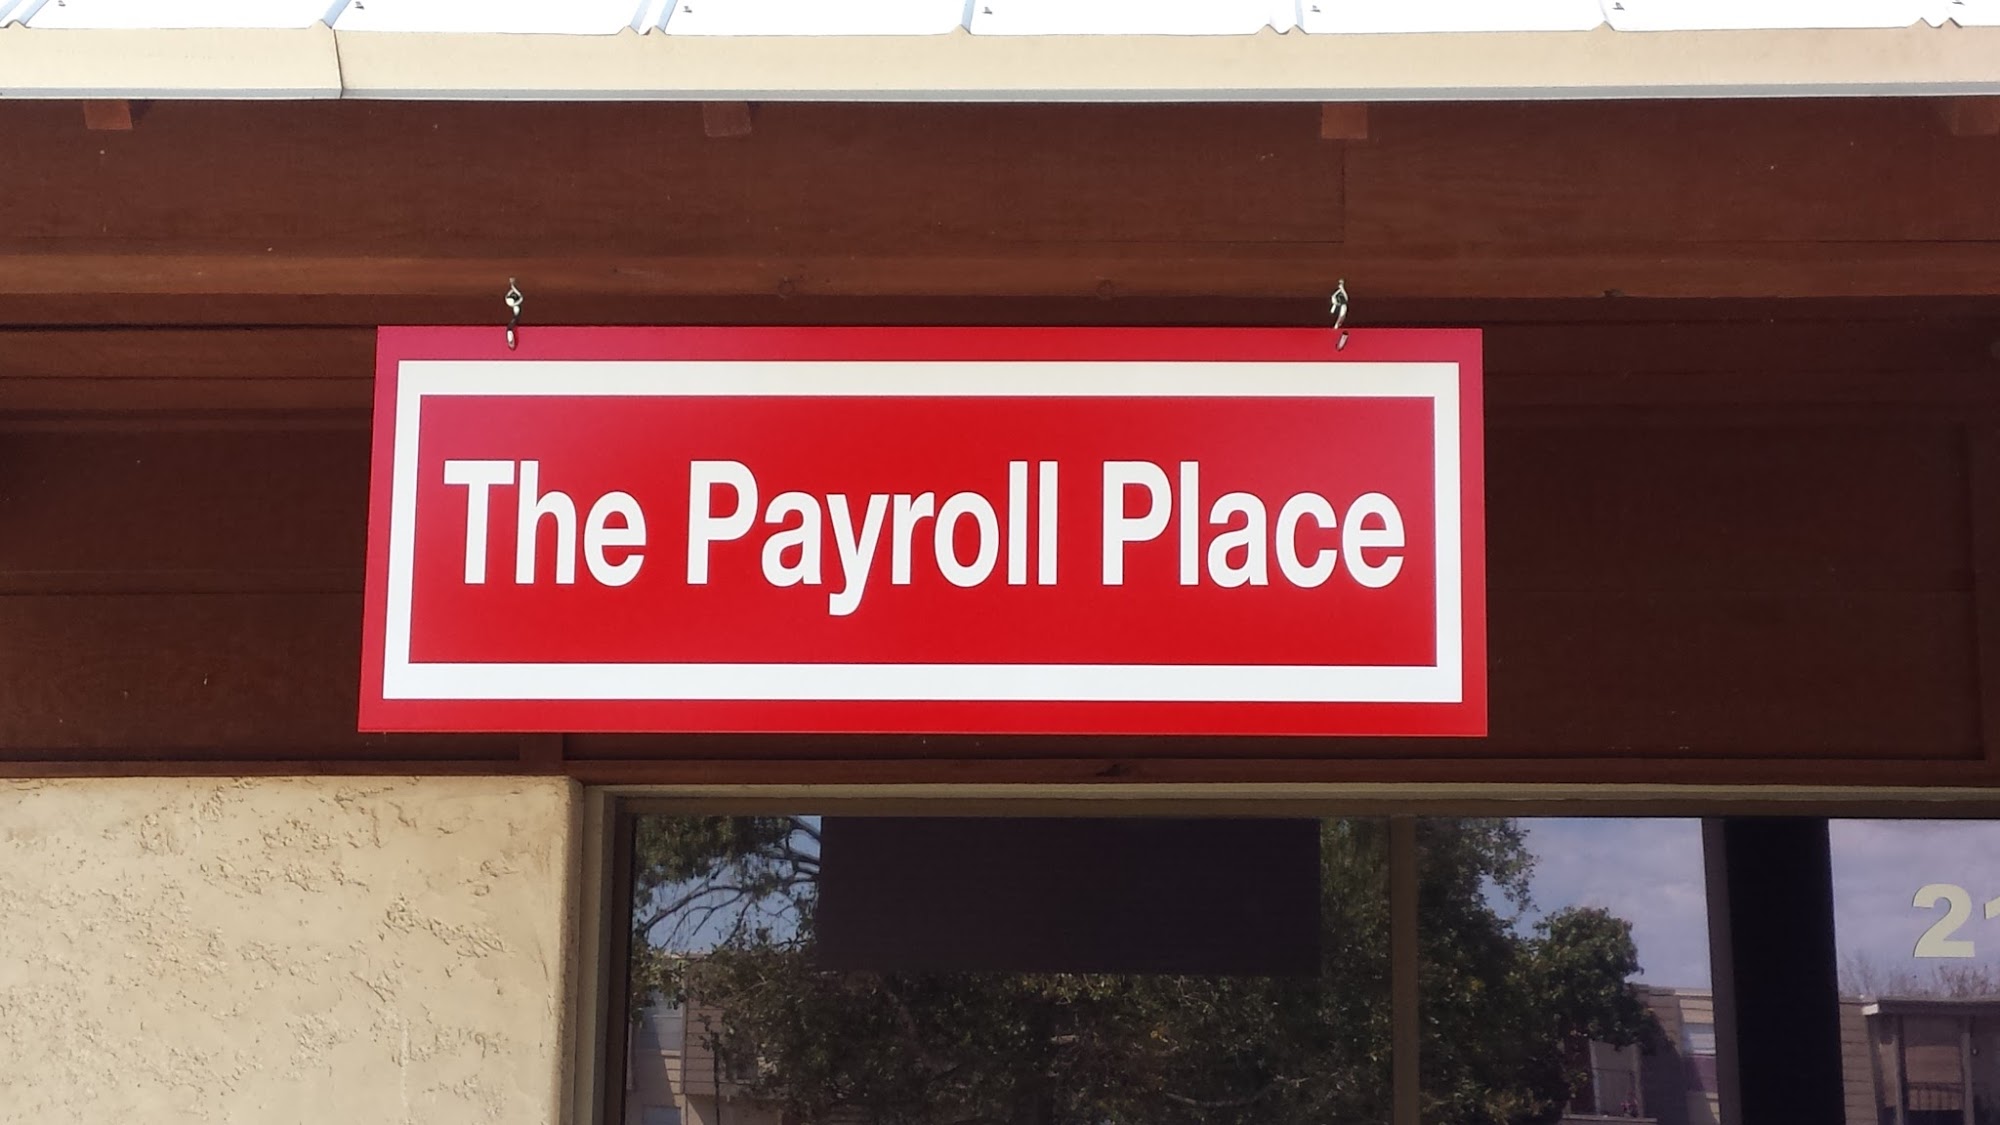 The Payroll Place